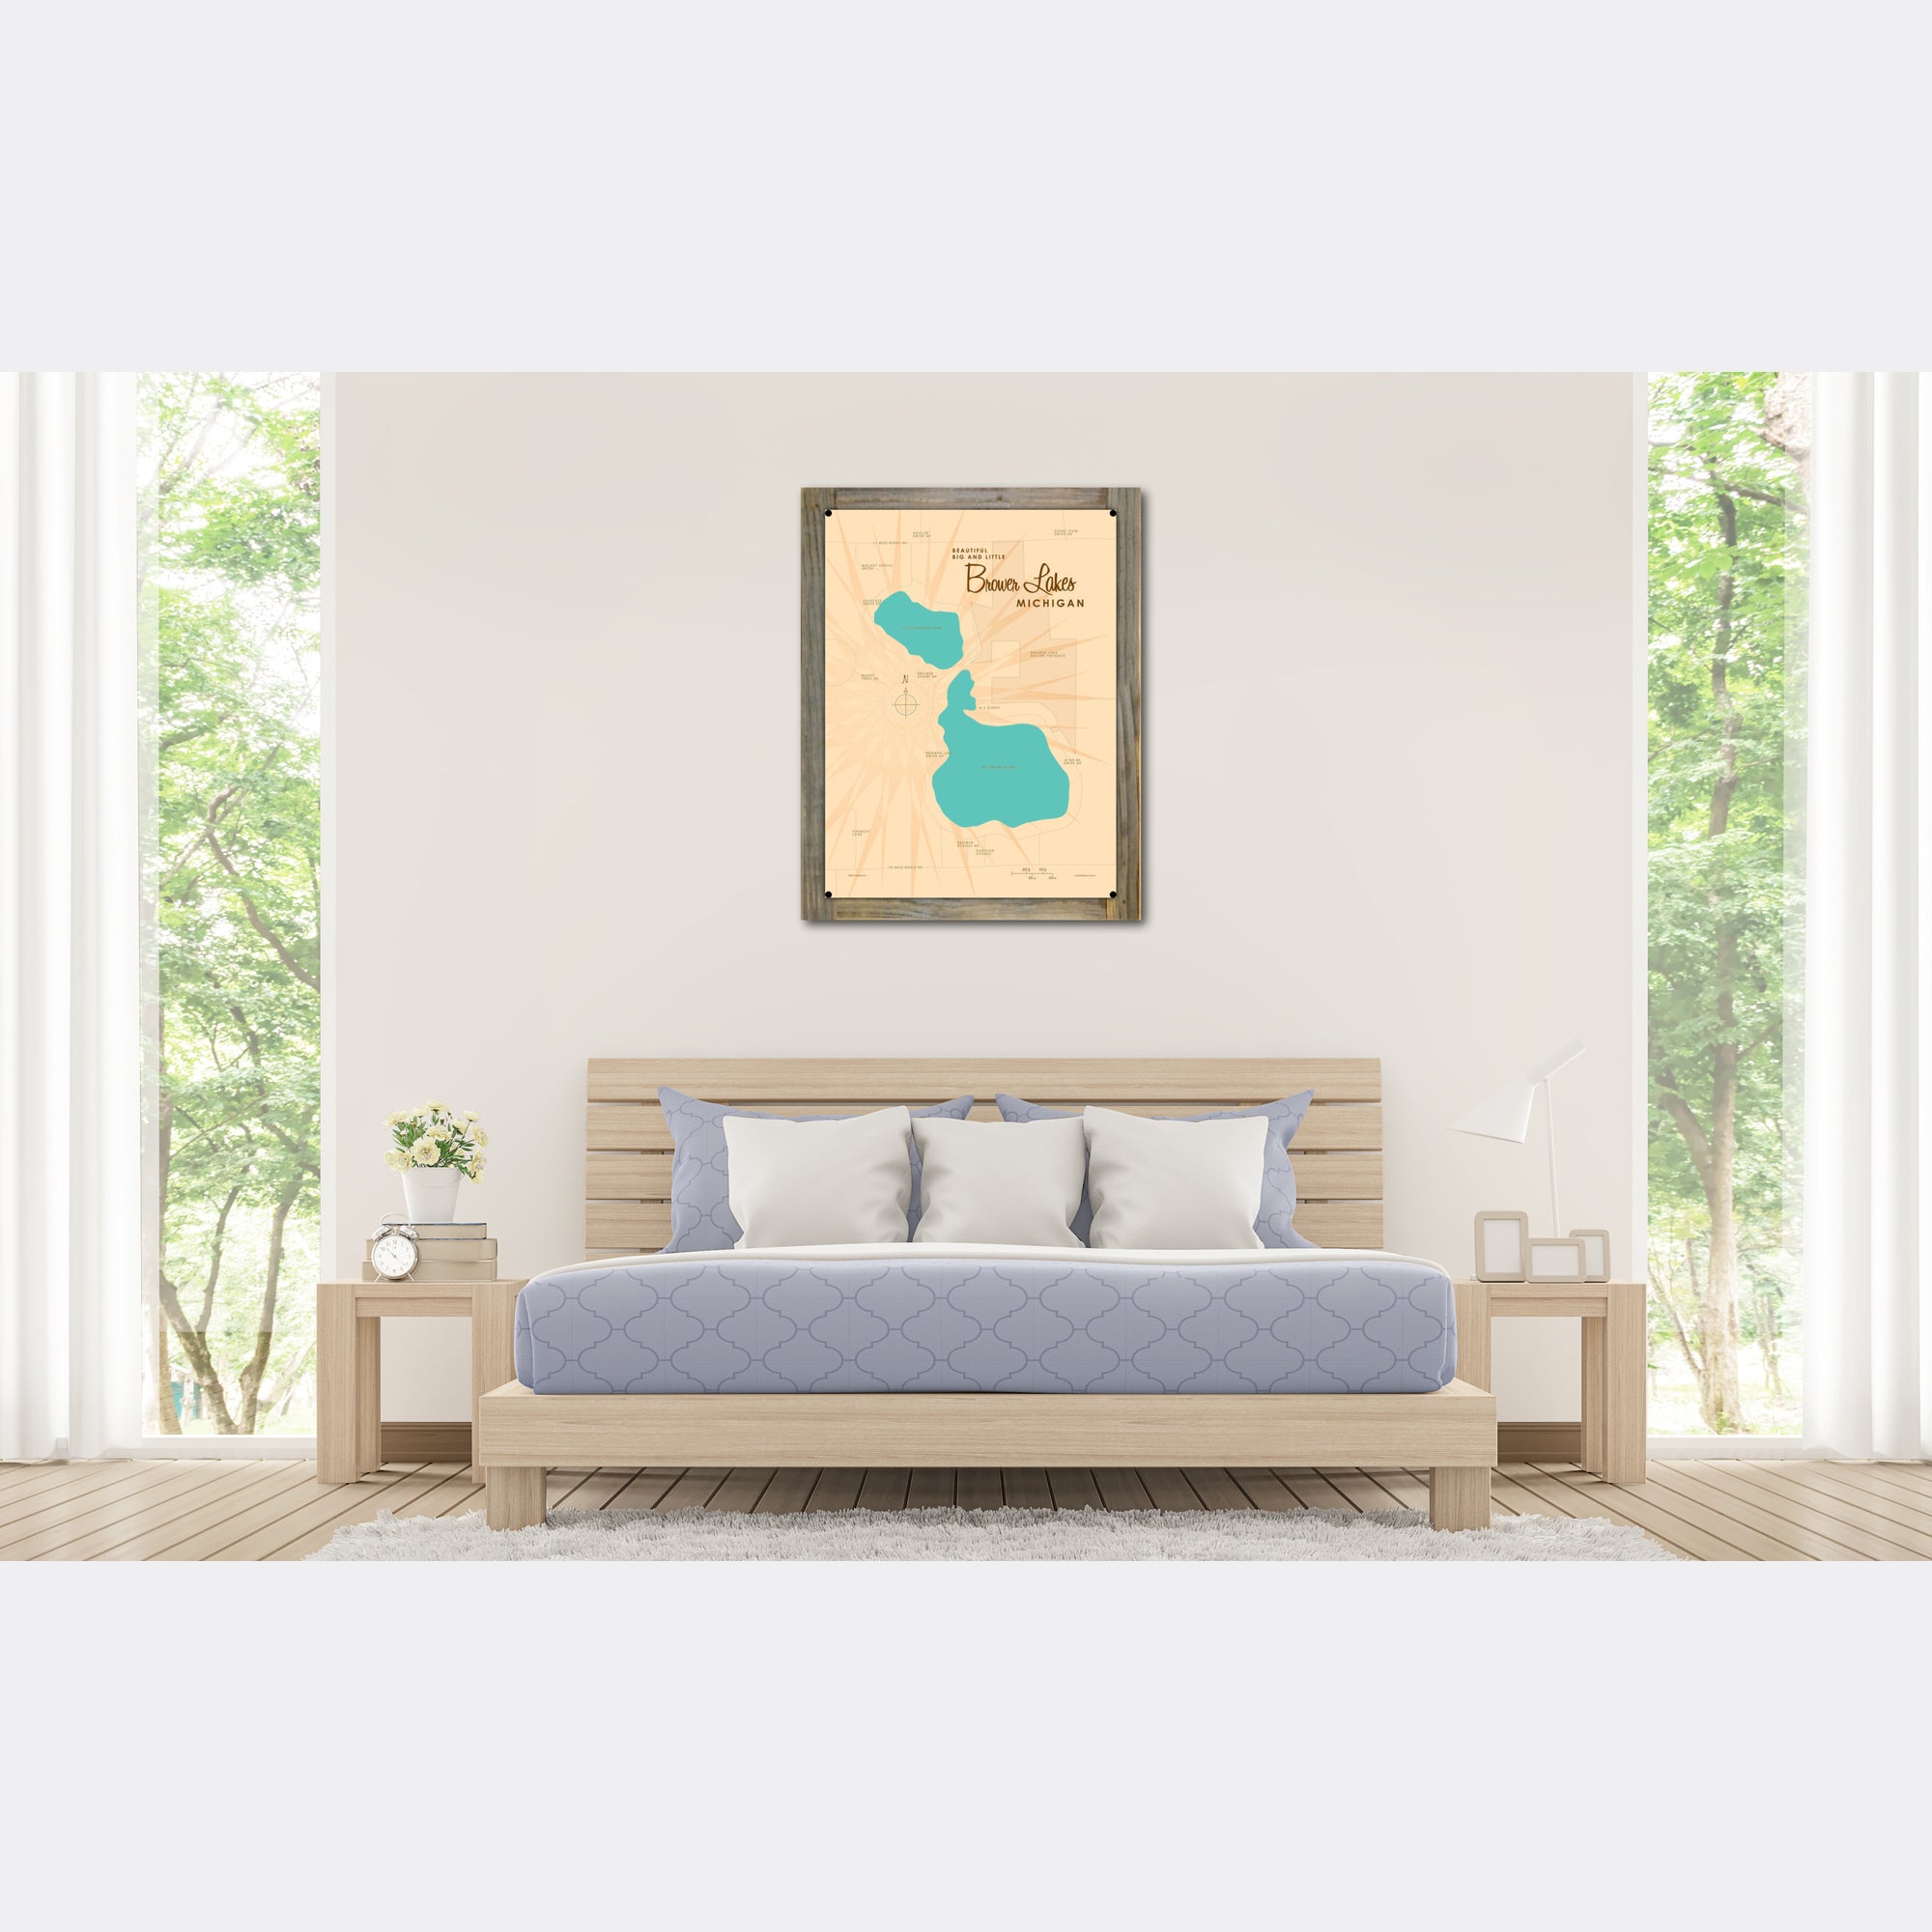 Big and Little Brower Lakes Michigan, Wood-Mounted Metal Sign Map Art